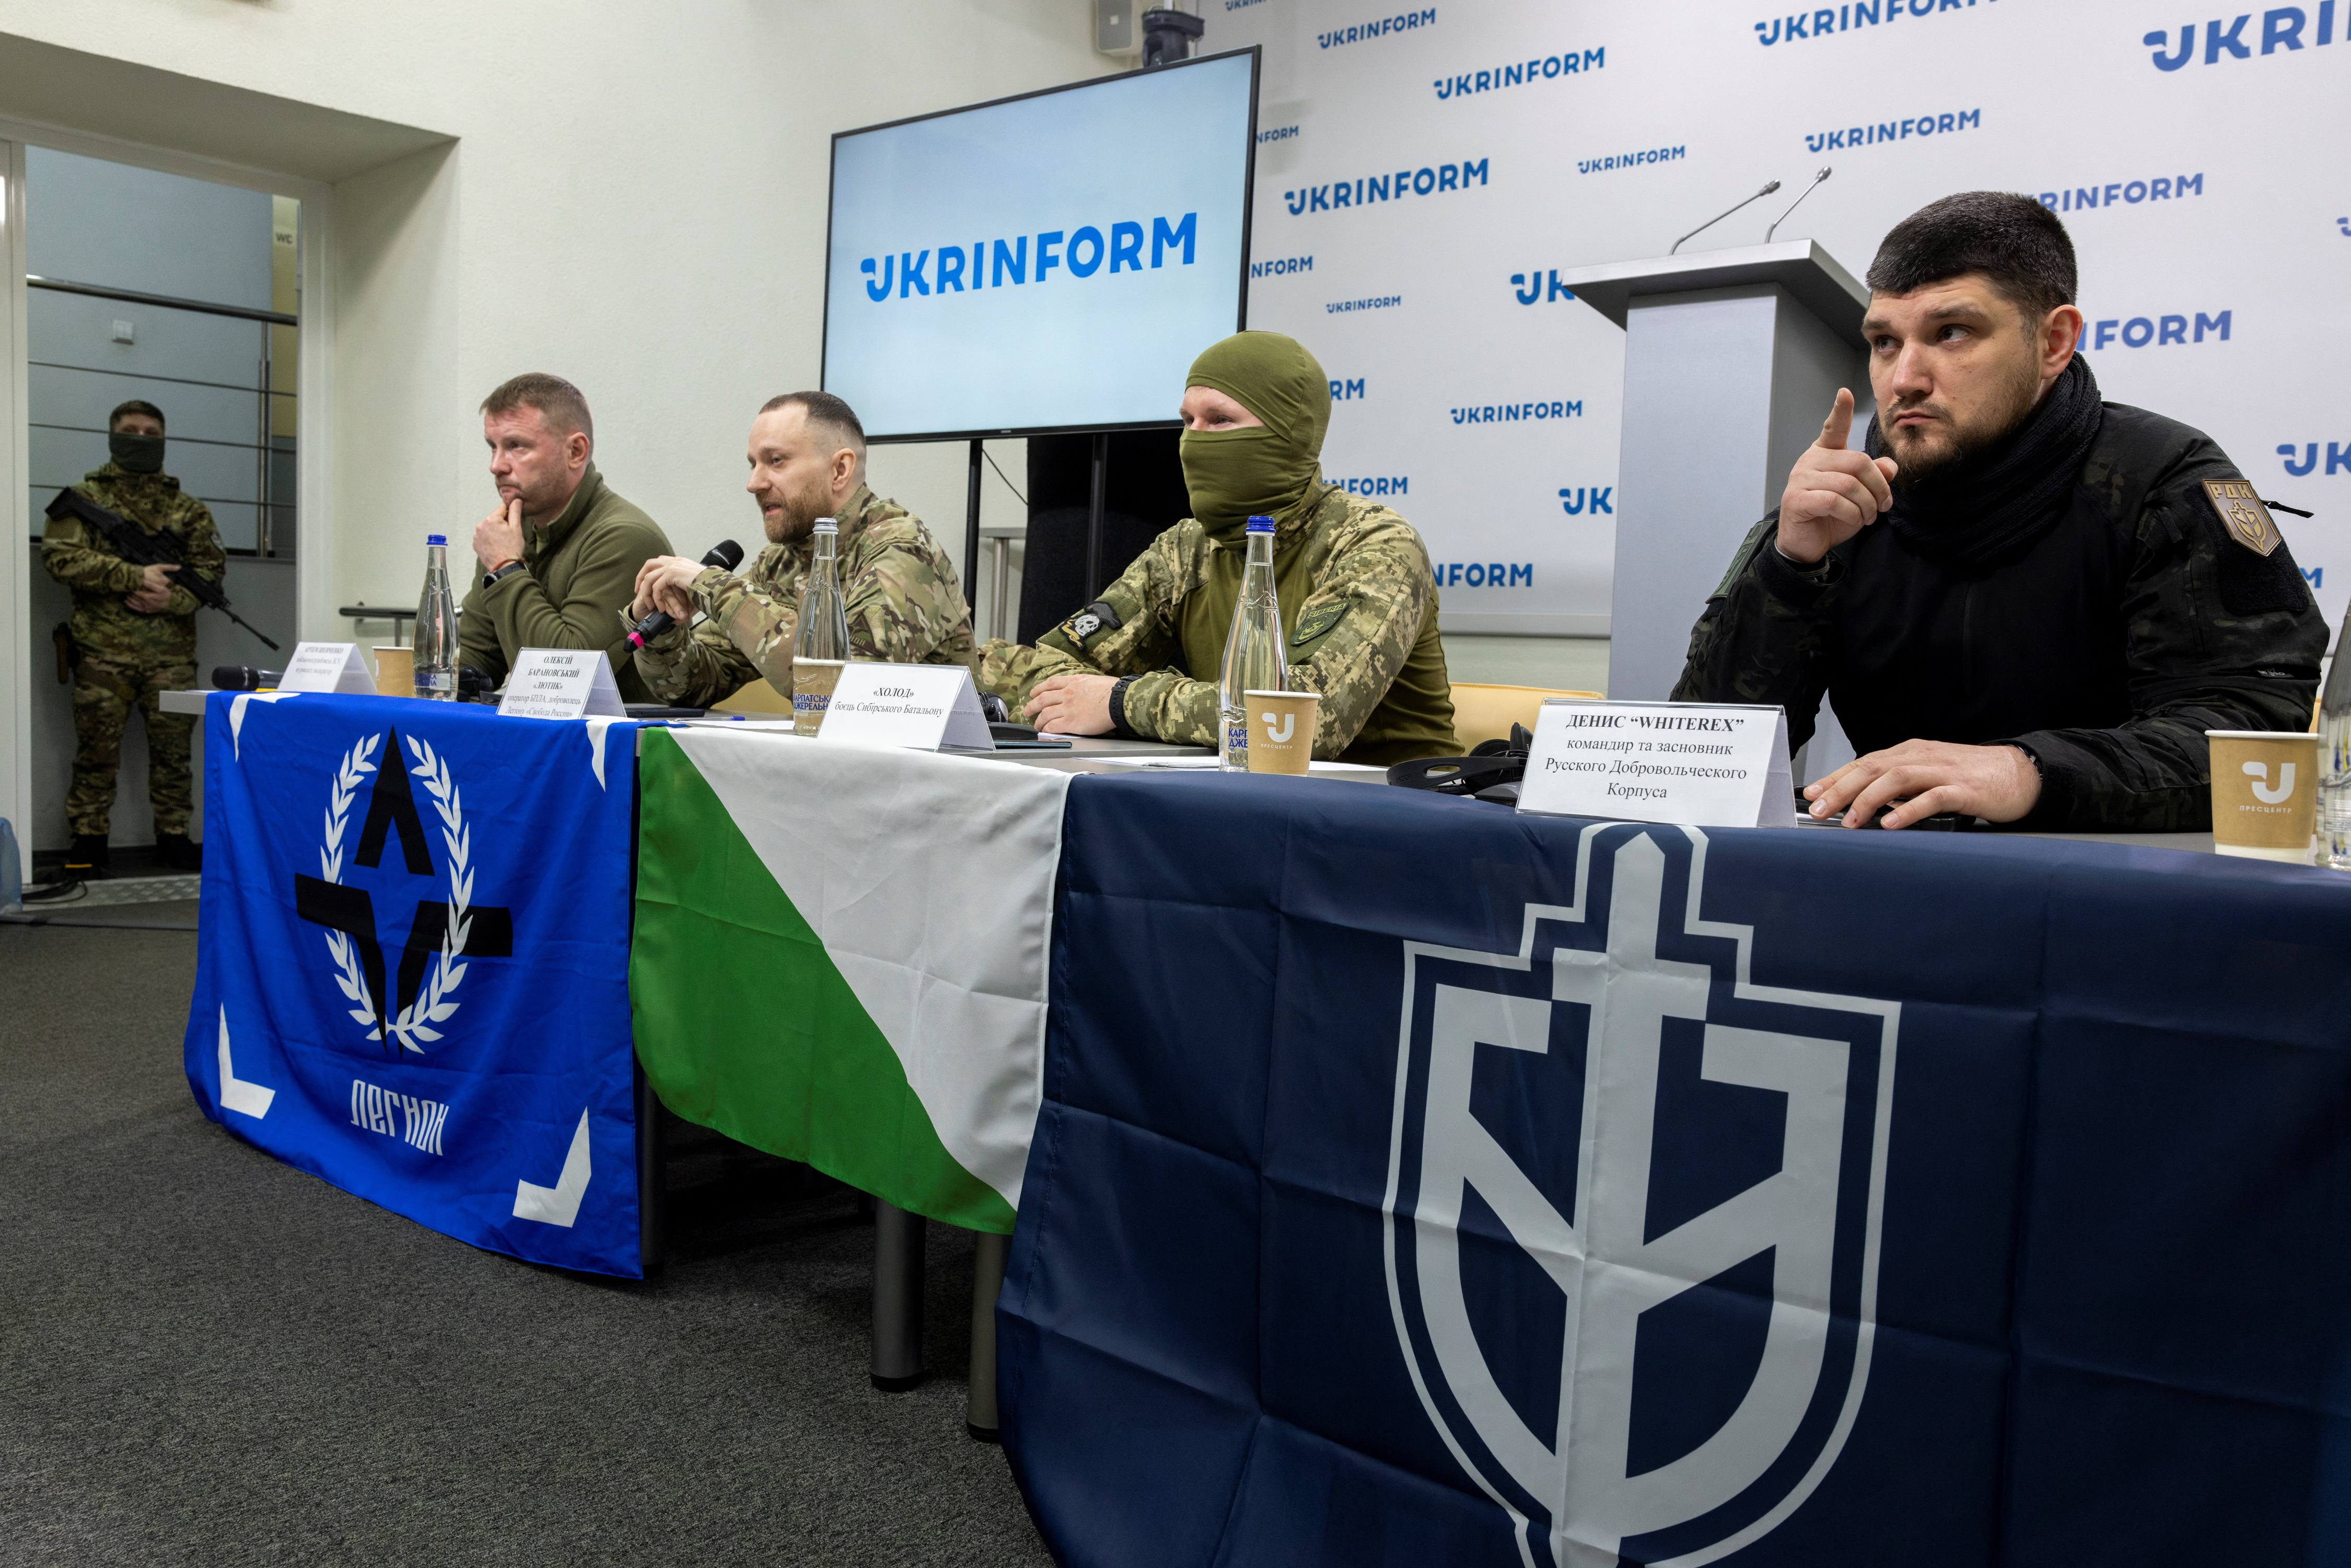 Press conference by Russian paramilitary groups who fight on the side Ukraine in Kyiv